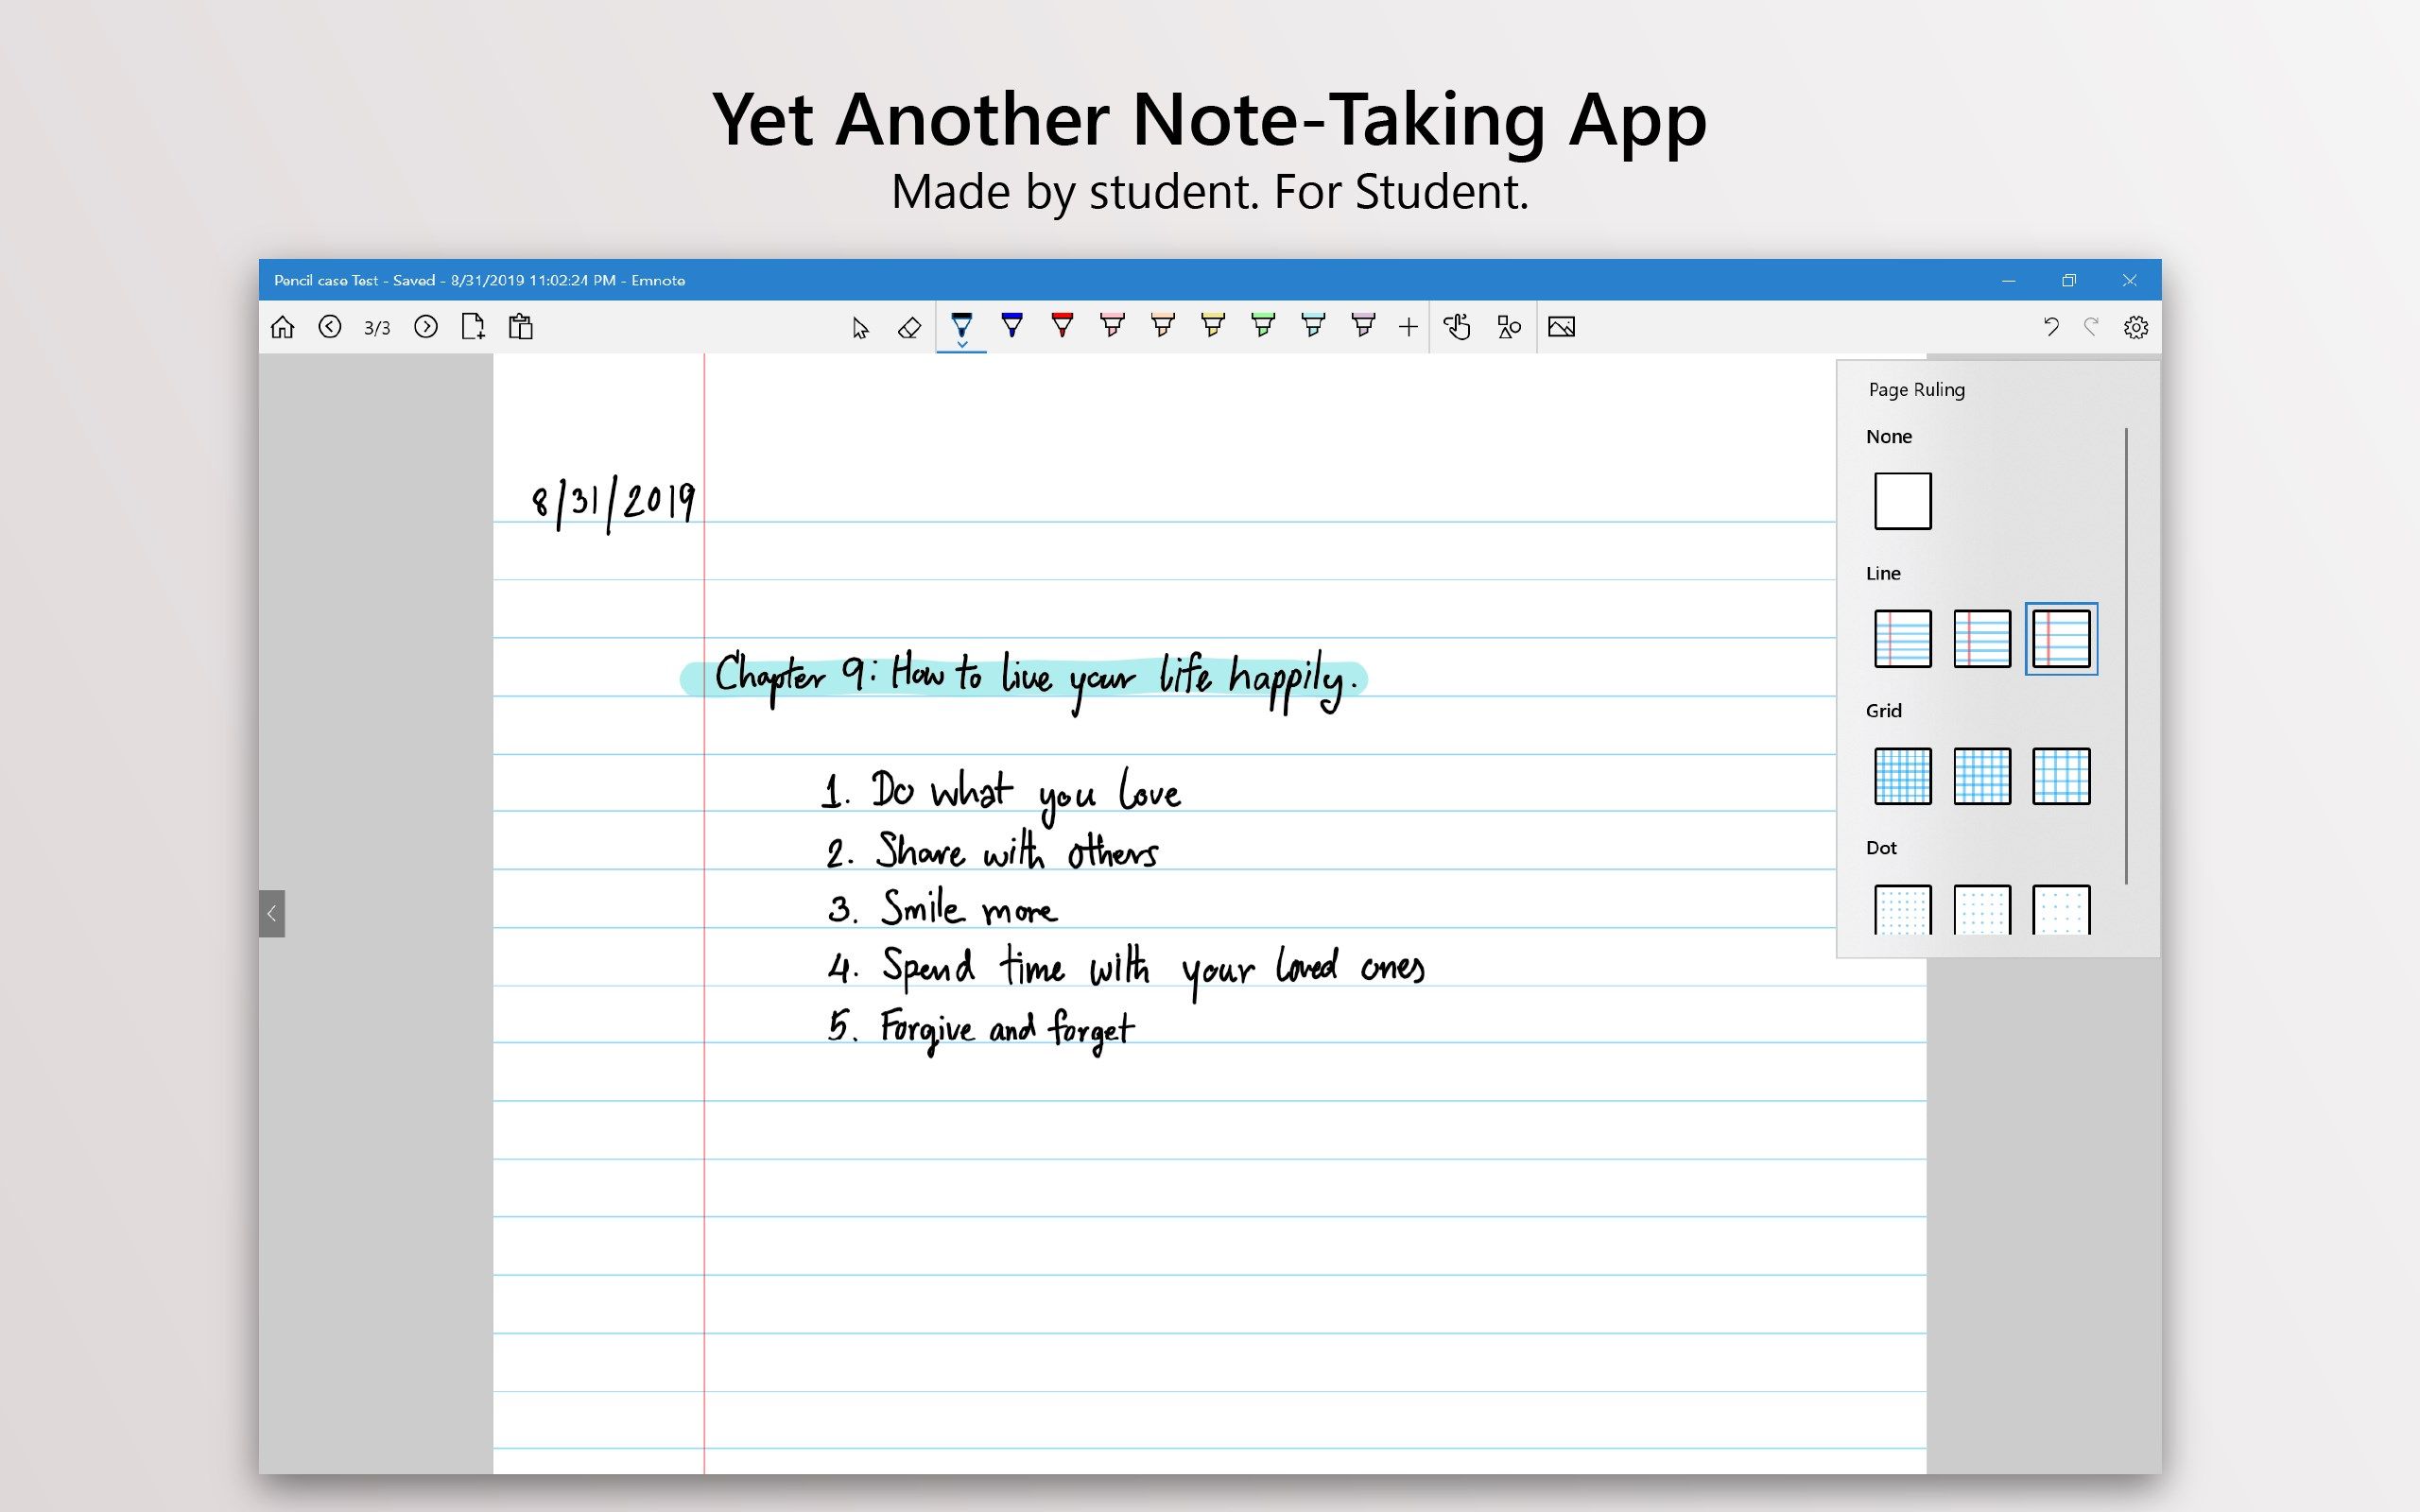 Yet another note-taking app